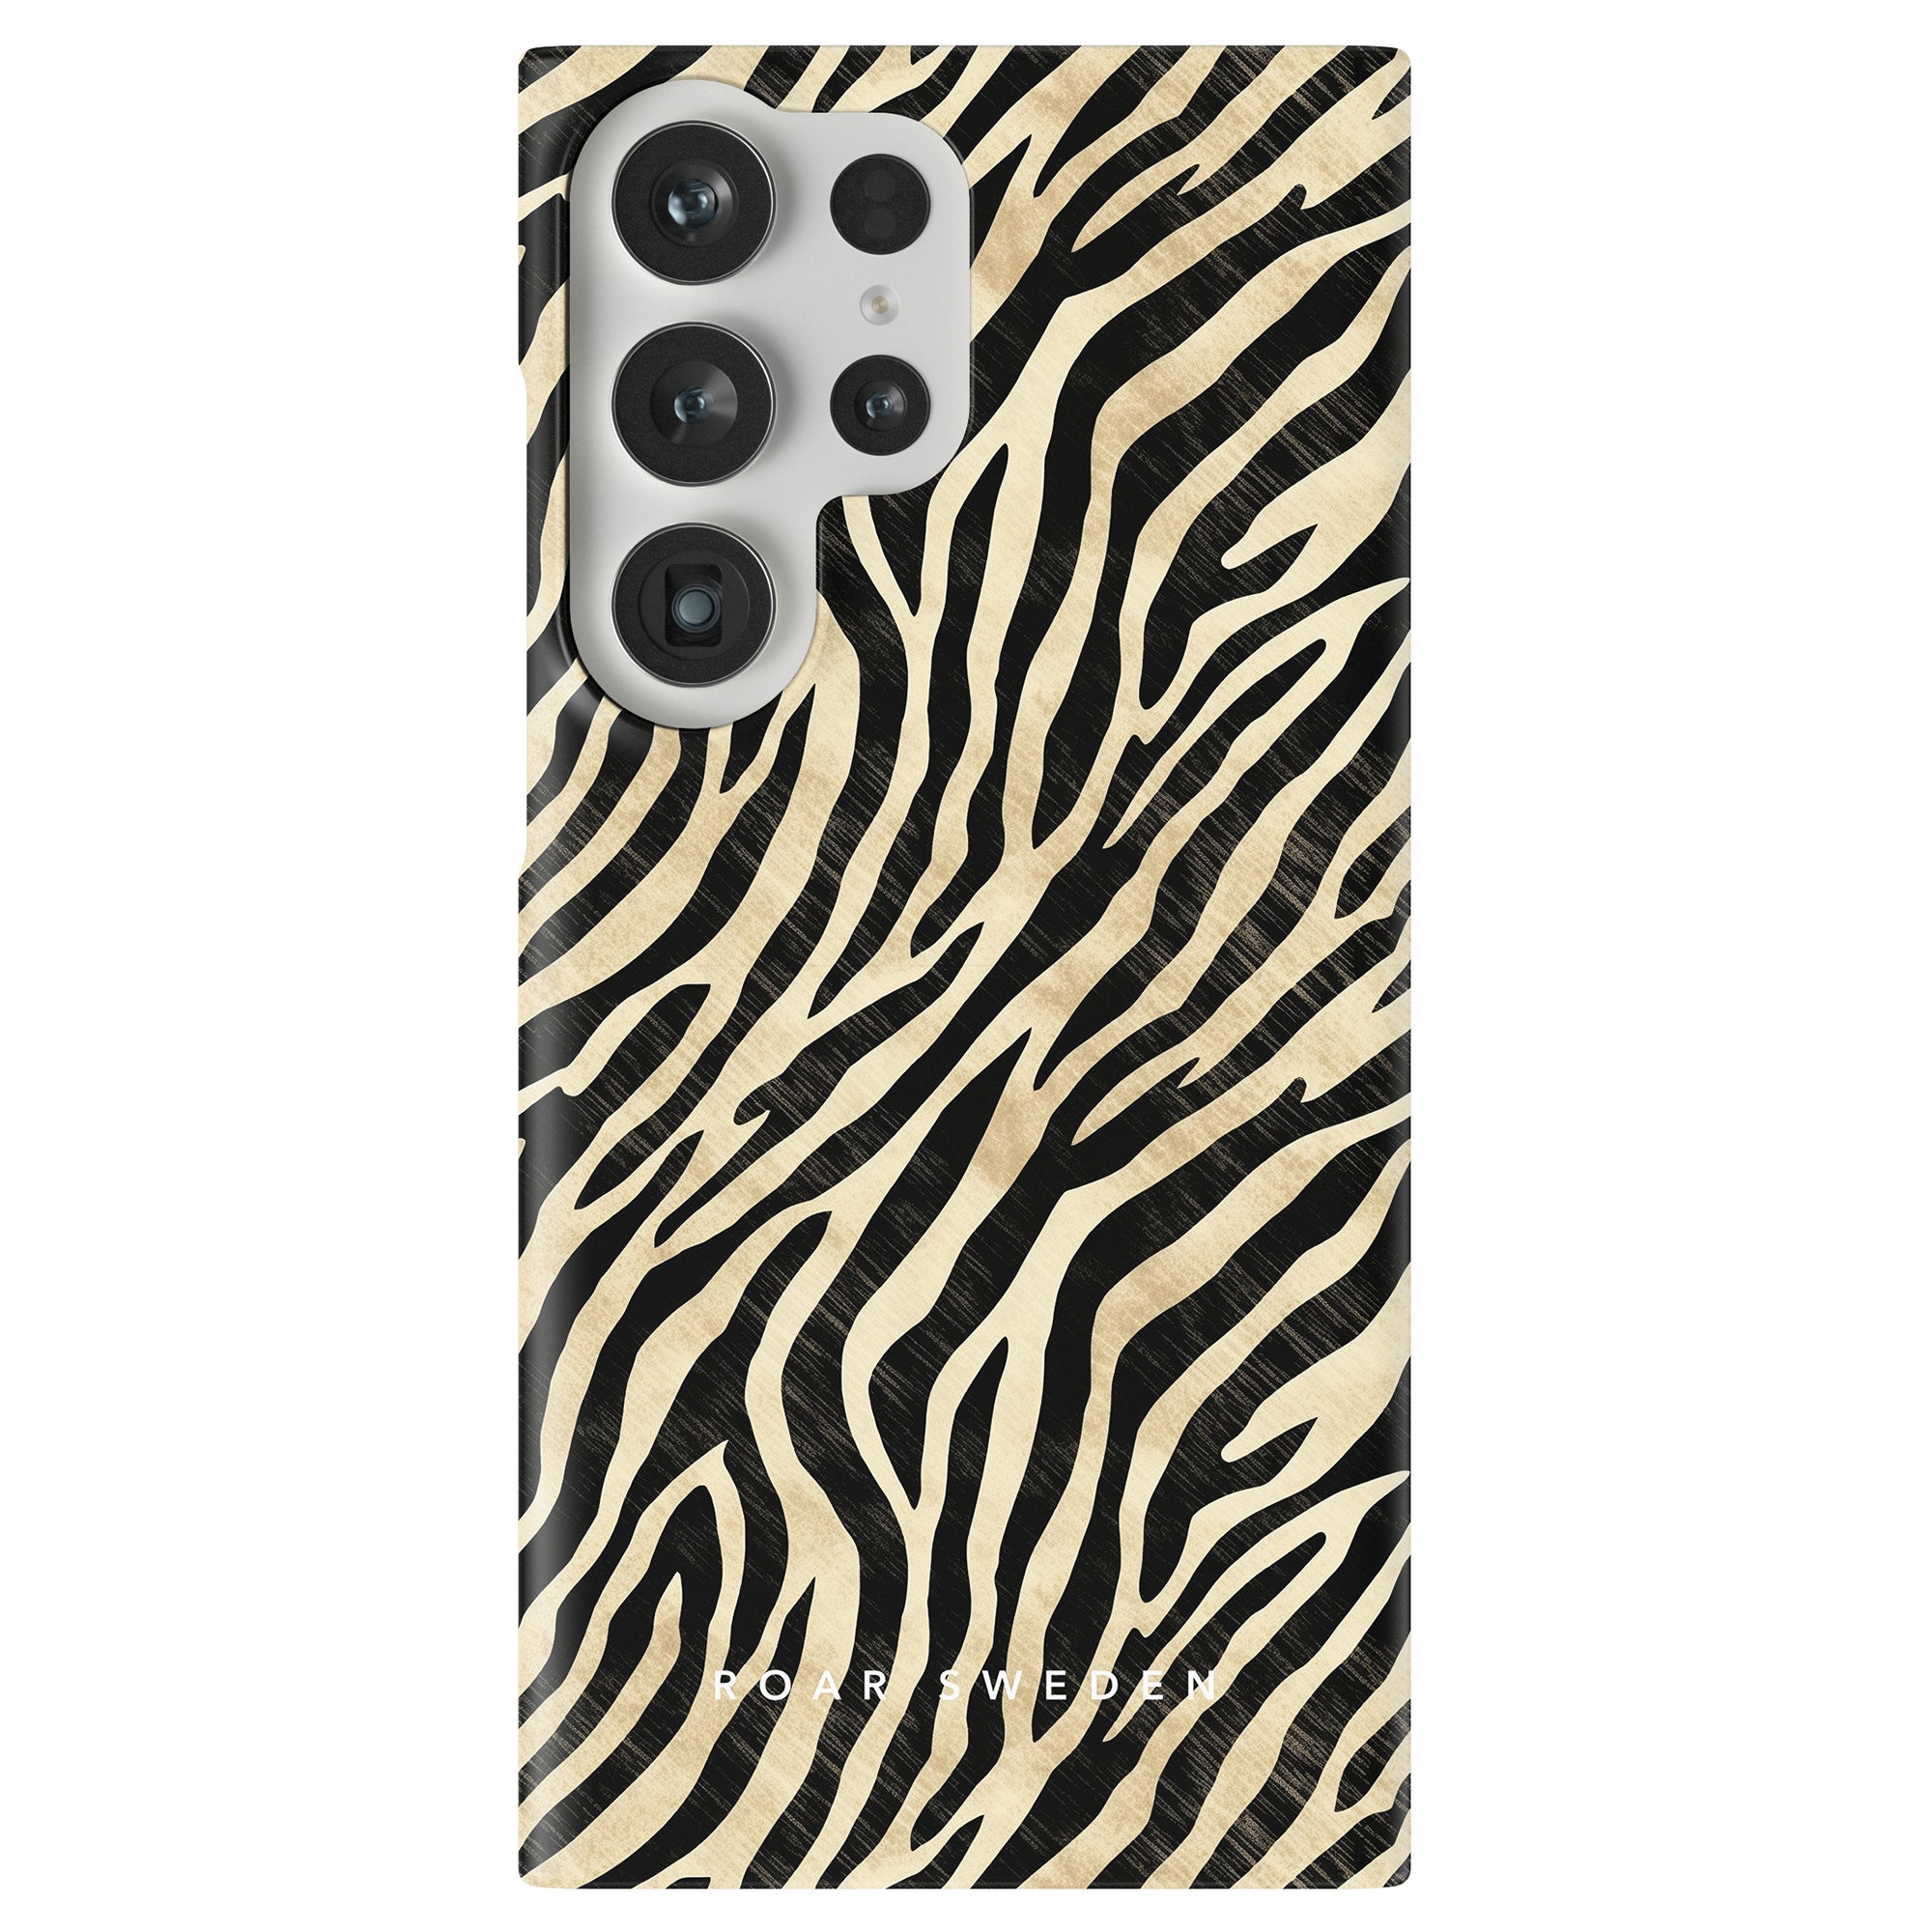 A smartphone with a Marty - Slim case from the Zebra Collection is displayed, highlighting its camera array at the top left.